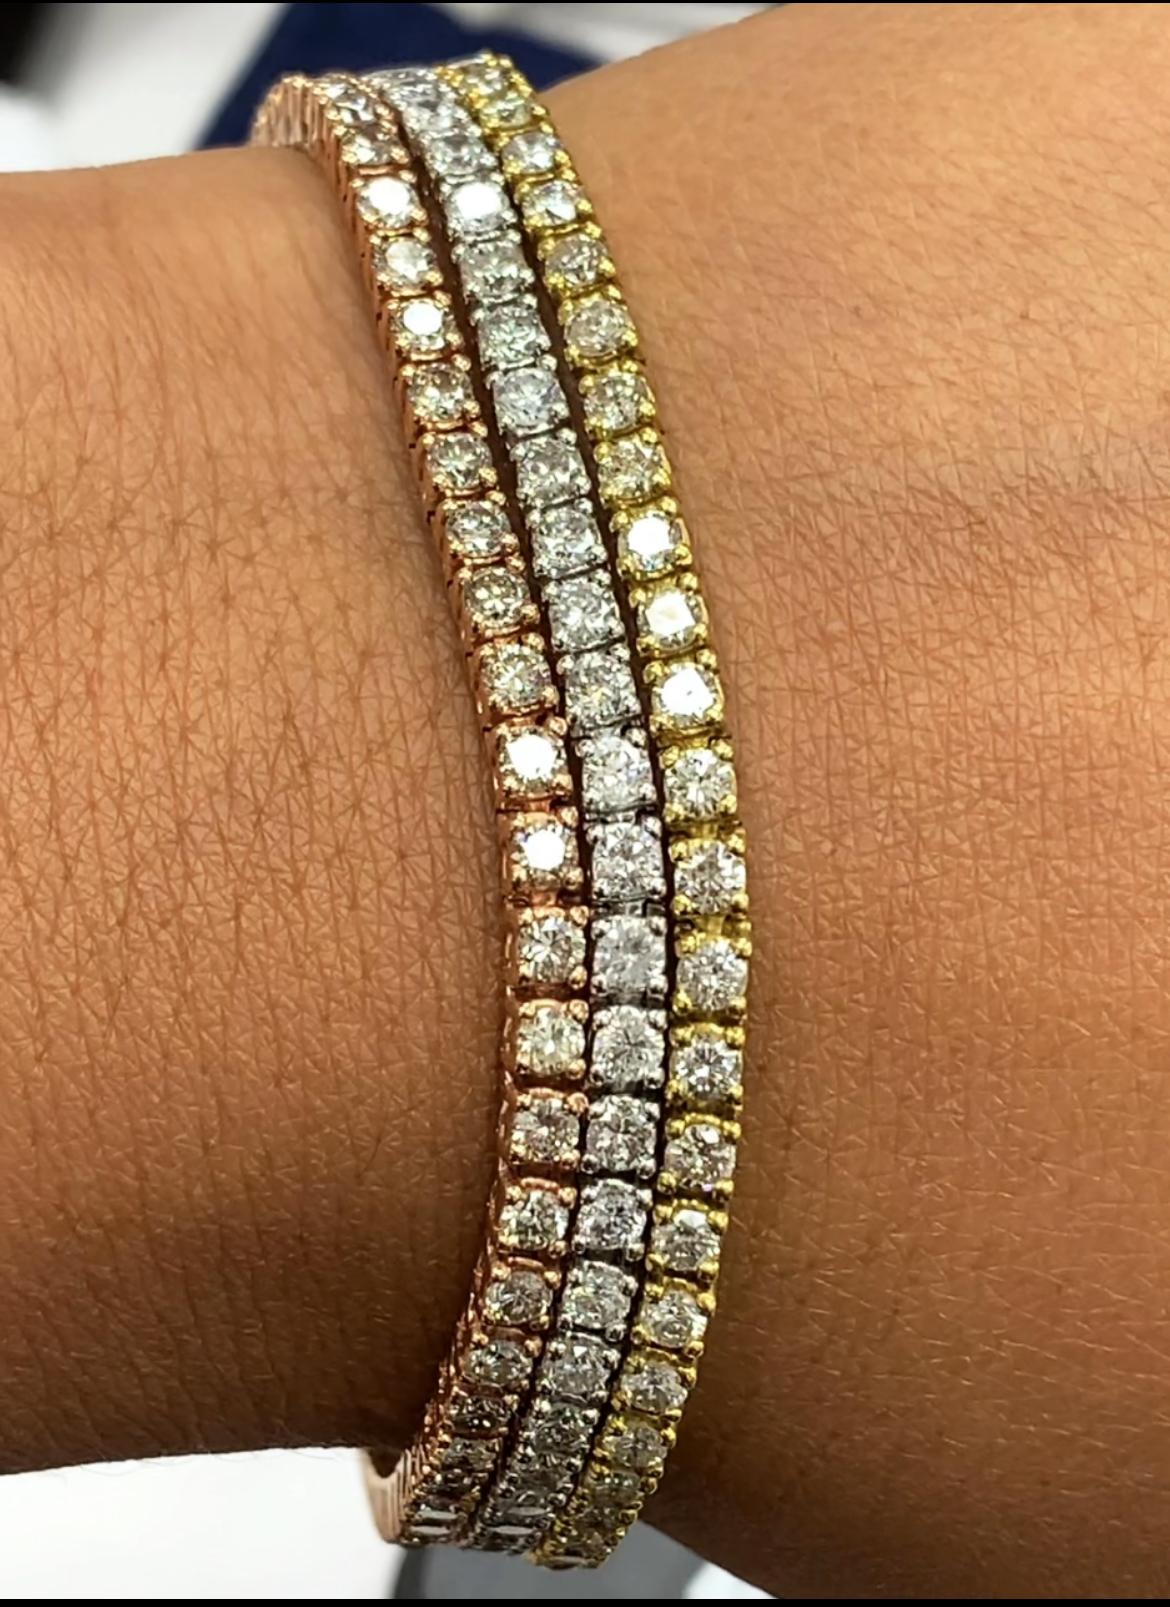 A diamond tennis bracelet is the most elegant and classic piece of evergreen jewelry. It is feminine, comfortable and accentuates a woman's wrist with brilliance and sparkles. This three row rose, white and yellow gold tennis bracelet is